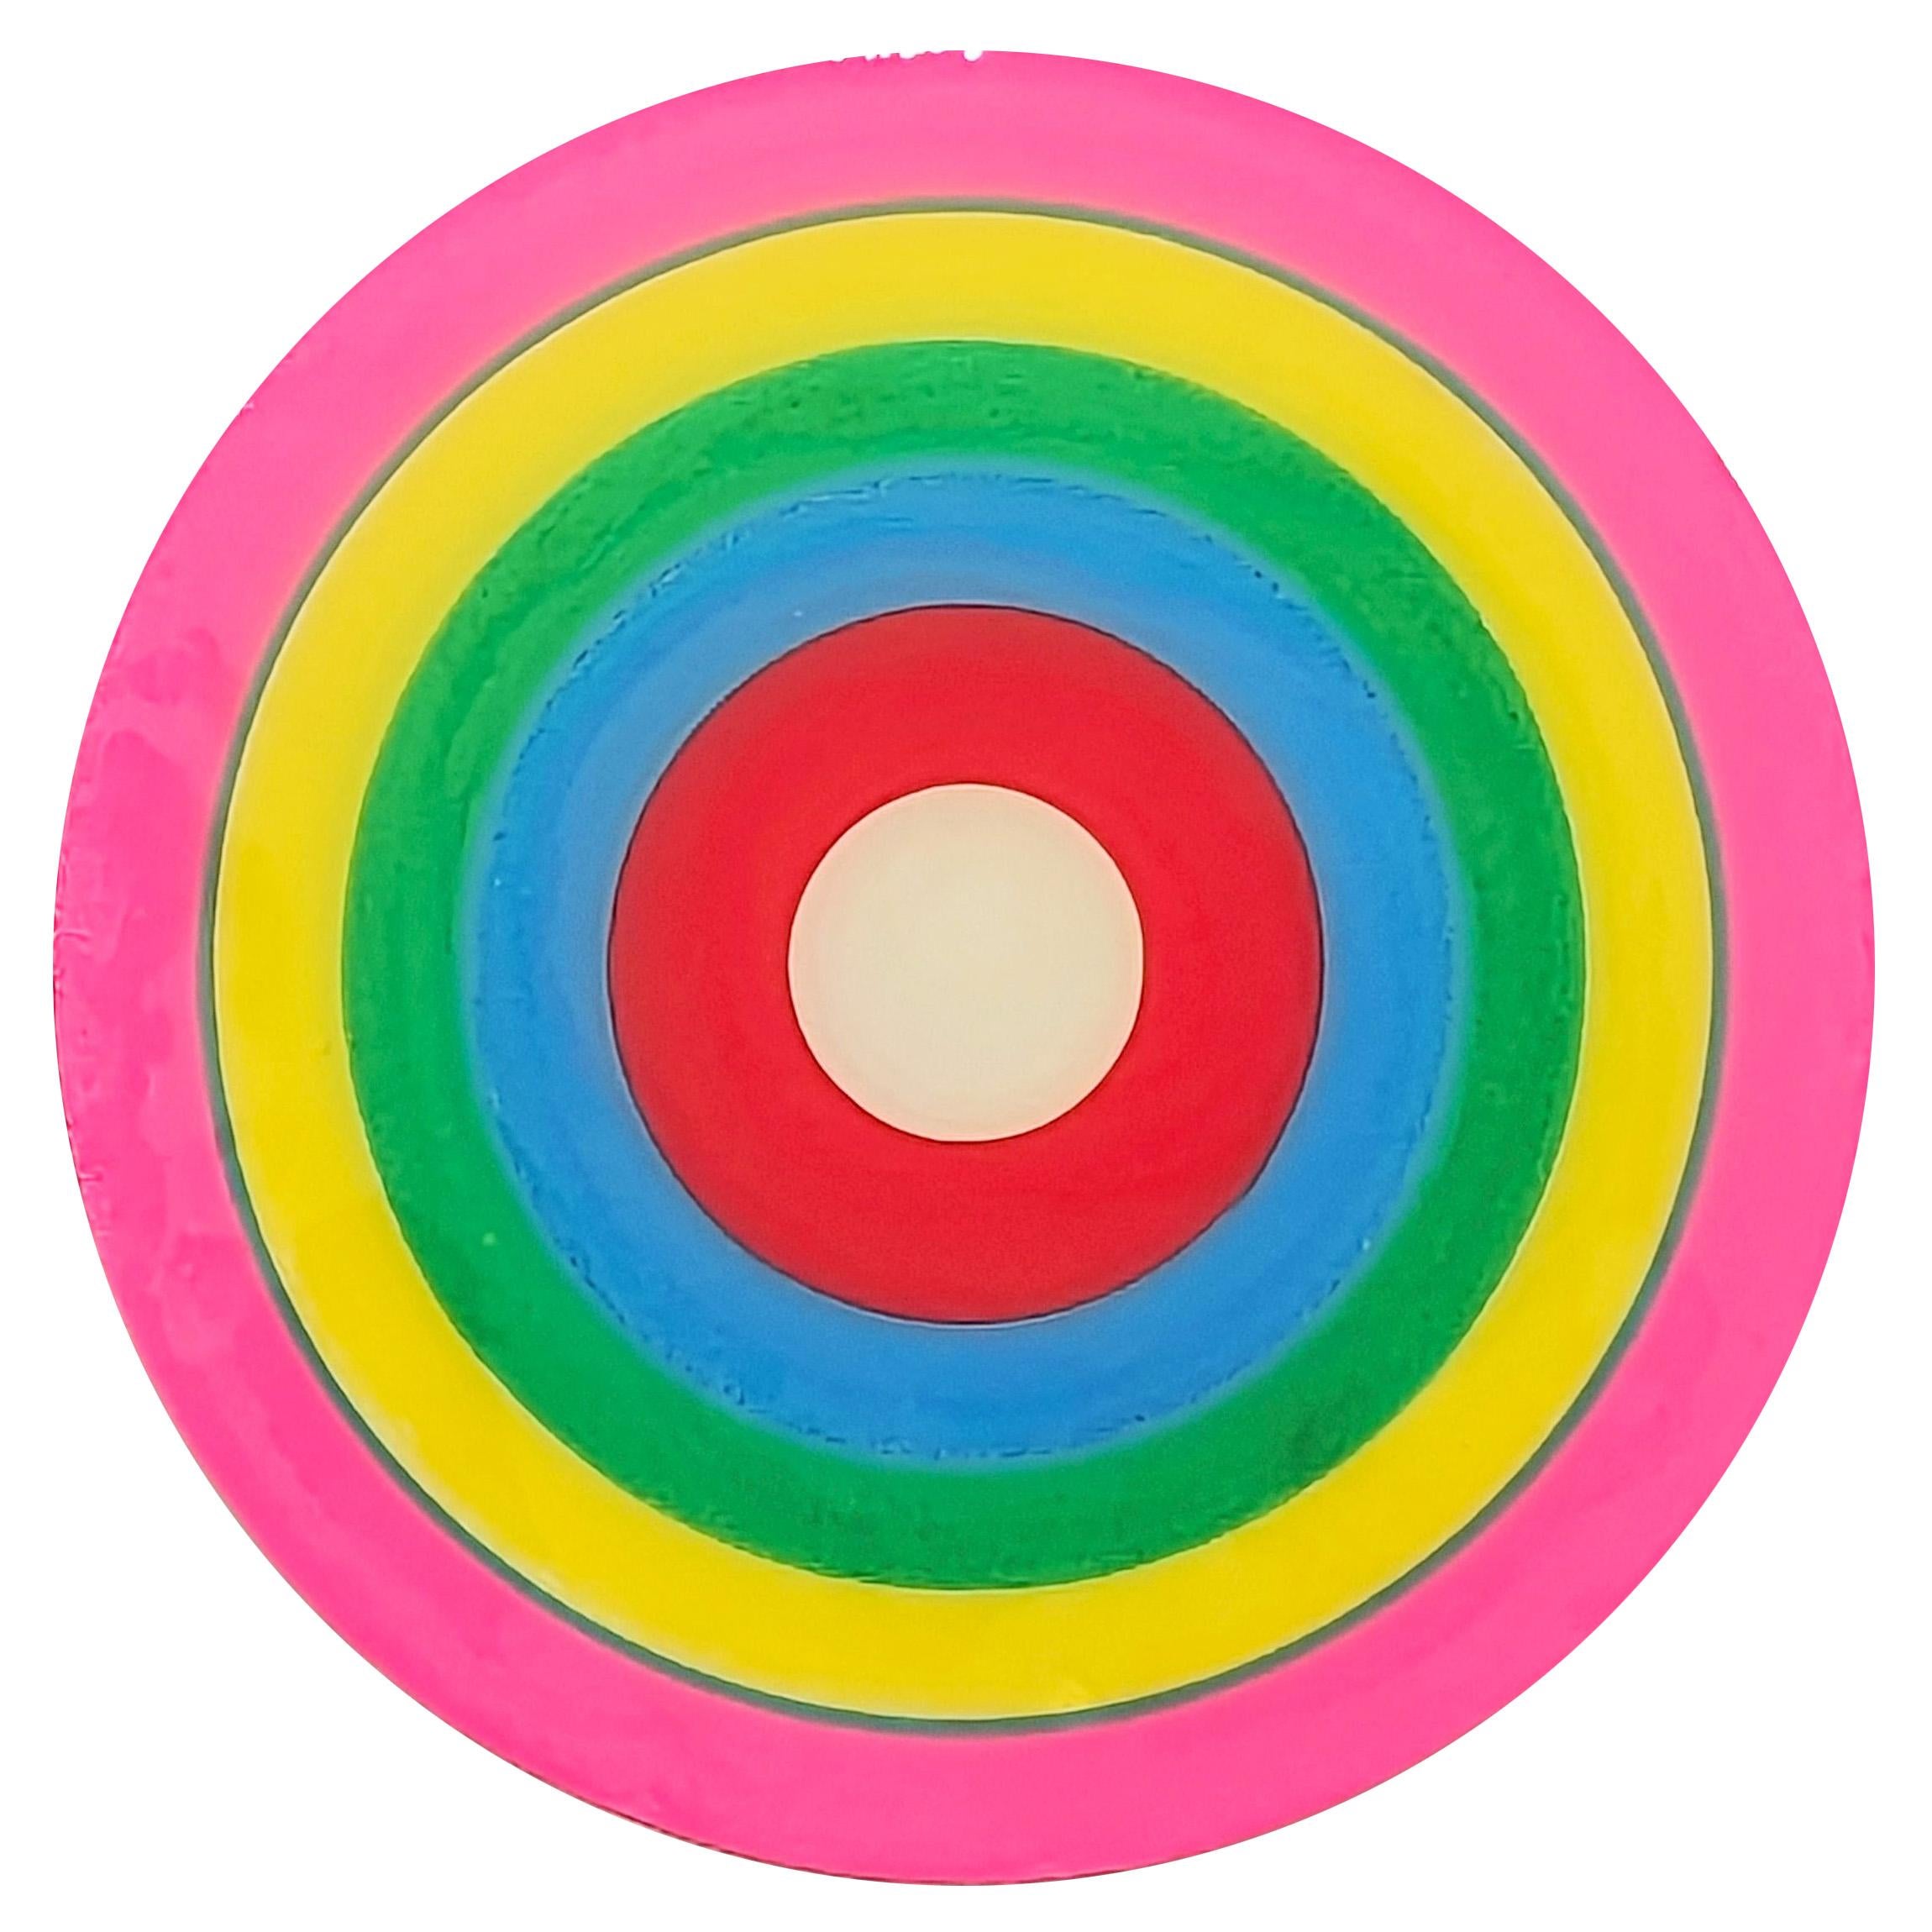 "Study for a Song 8" Contemporary Colorful Abstract Concentric Circle Painting – Mixed Media Art von David Hardaker